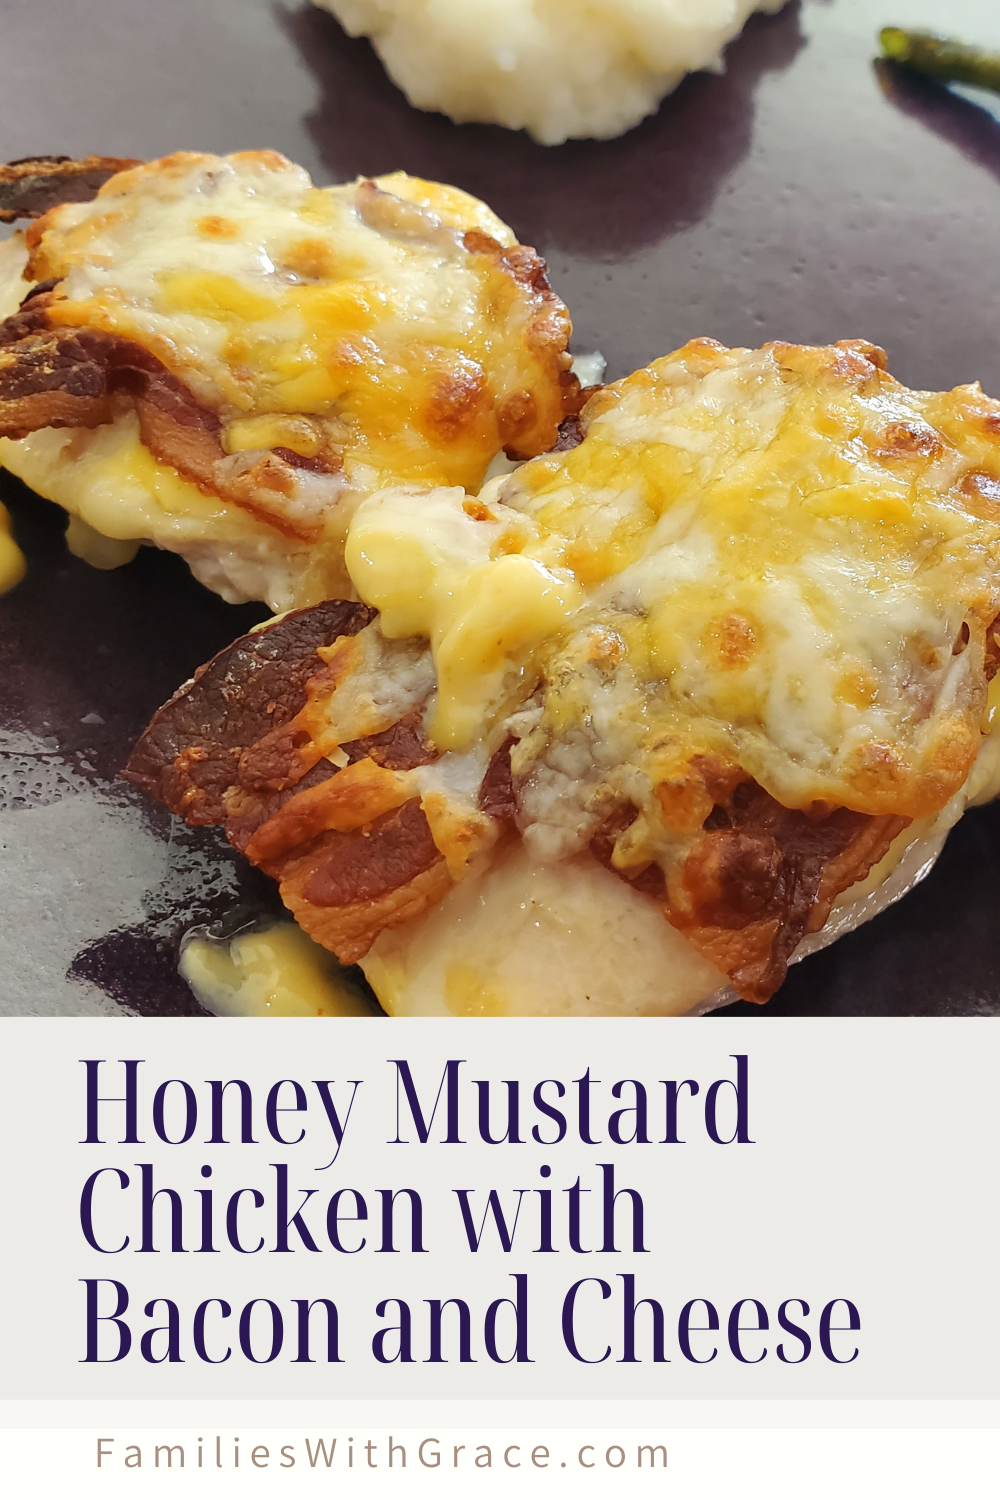 Honey mustard chicken with bacon and cheese